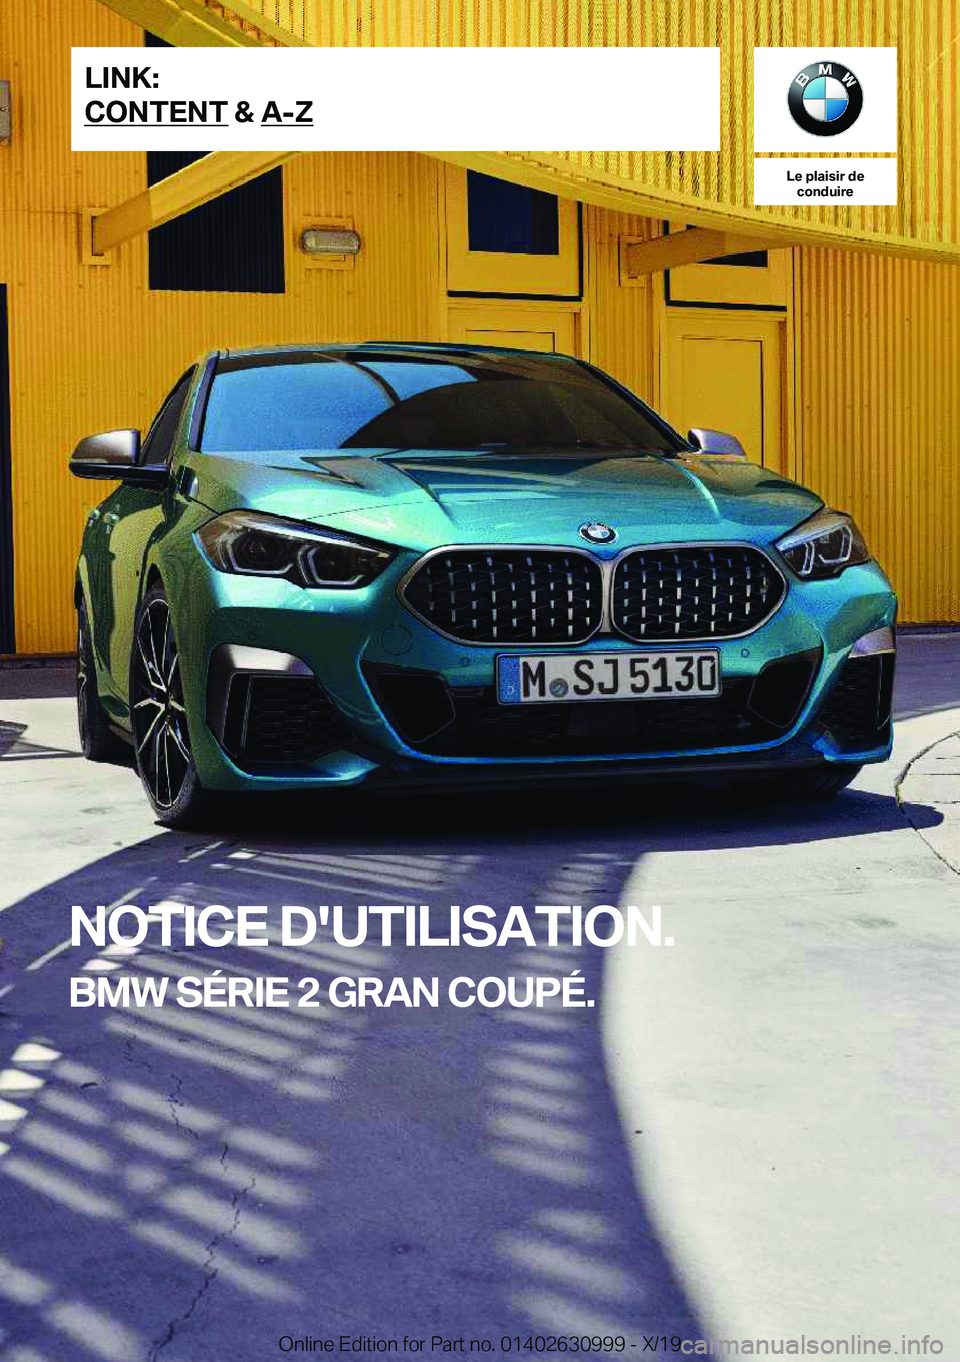 BMW 2 SERIES GRAN COUPE 2020  Notices Demploi (in French) �L�e��p�l�a�i�s�i�r��d�e�c�o�n�d�u�i�r�e
�N�O�T�I�C�E��D�'�U�T�I�L�I�S�A�T�I�O�N�.
�B�M�W��S�